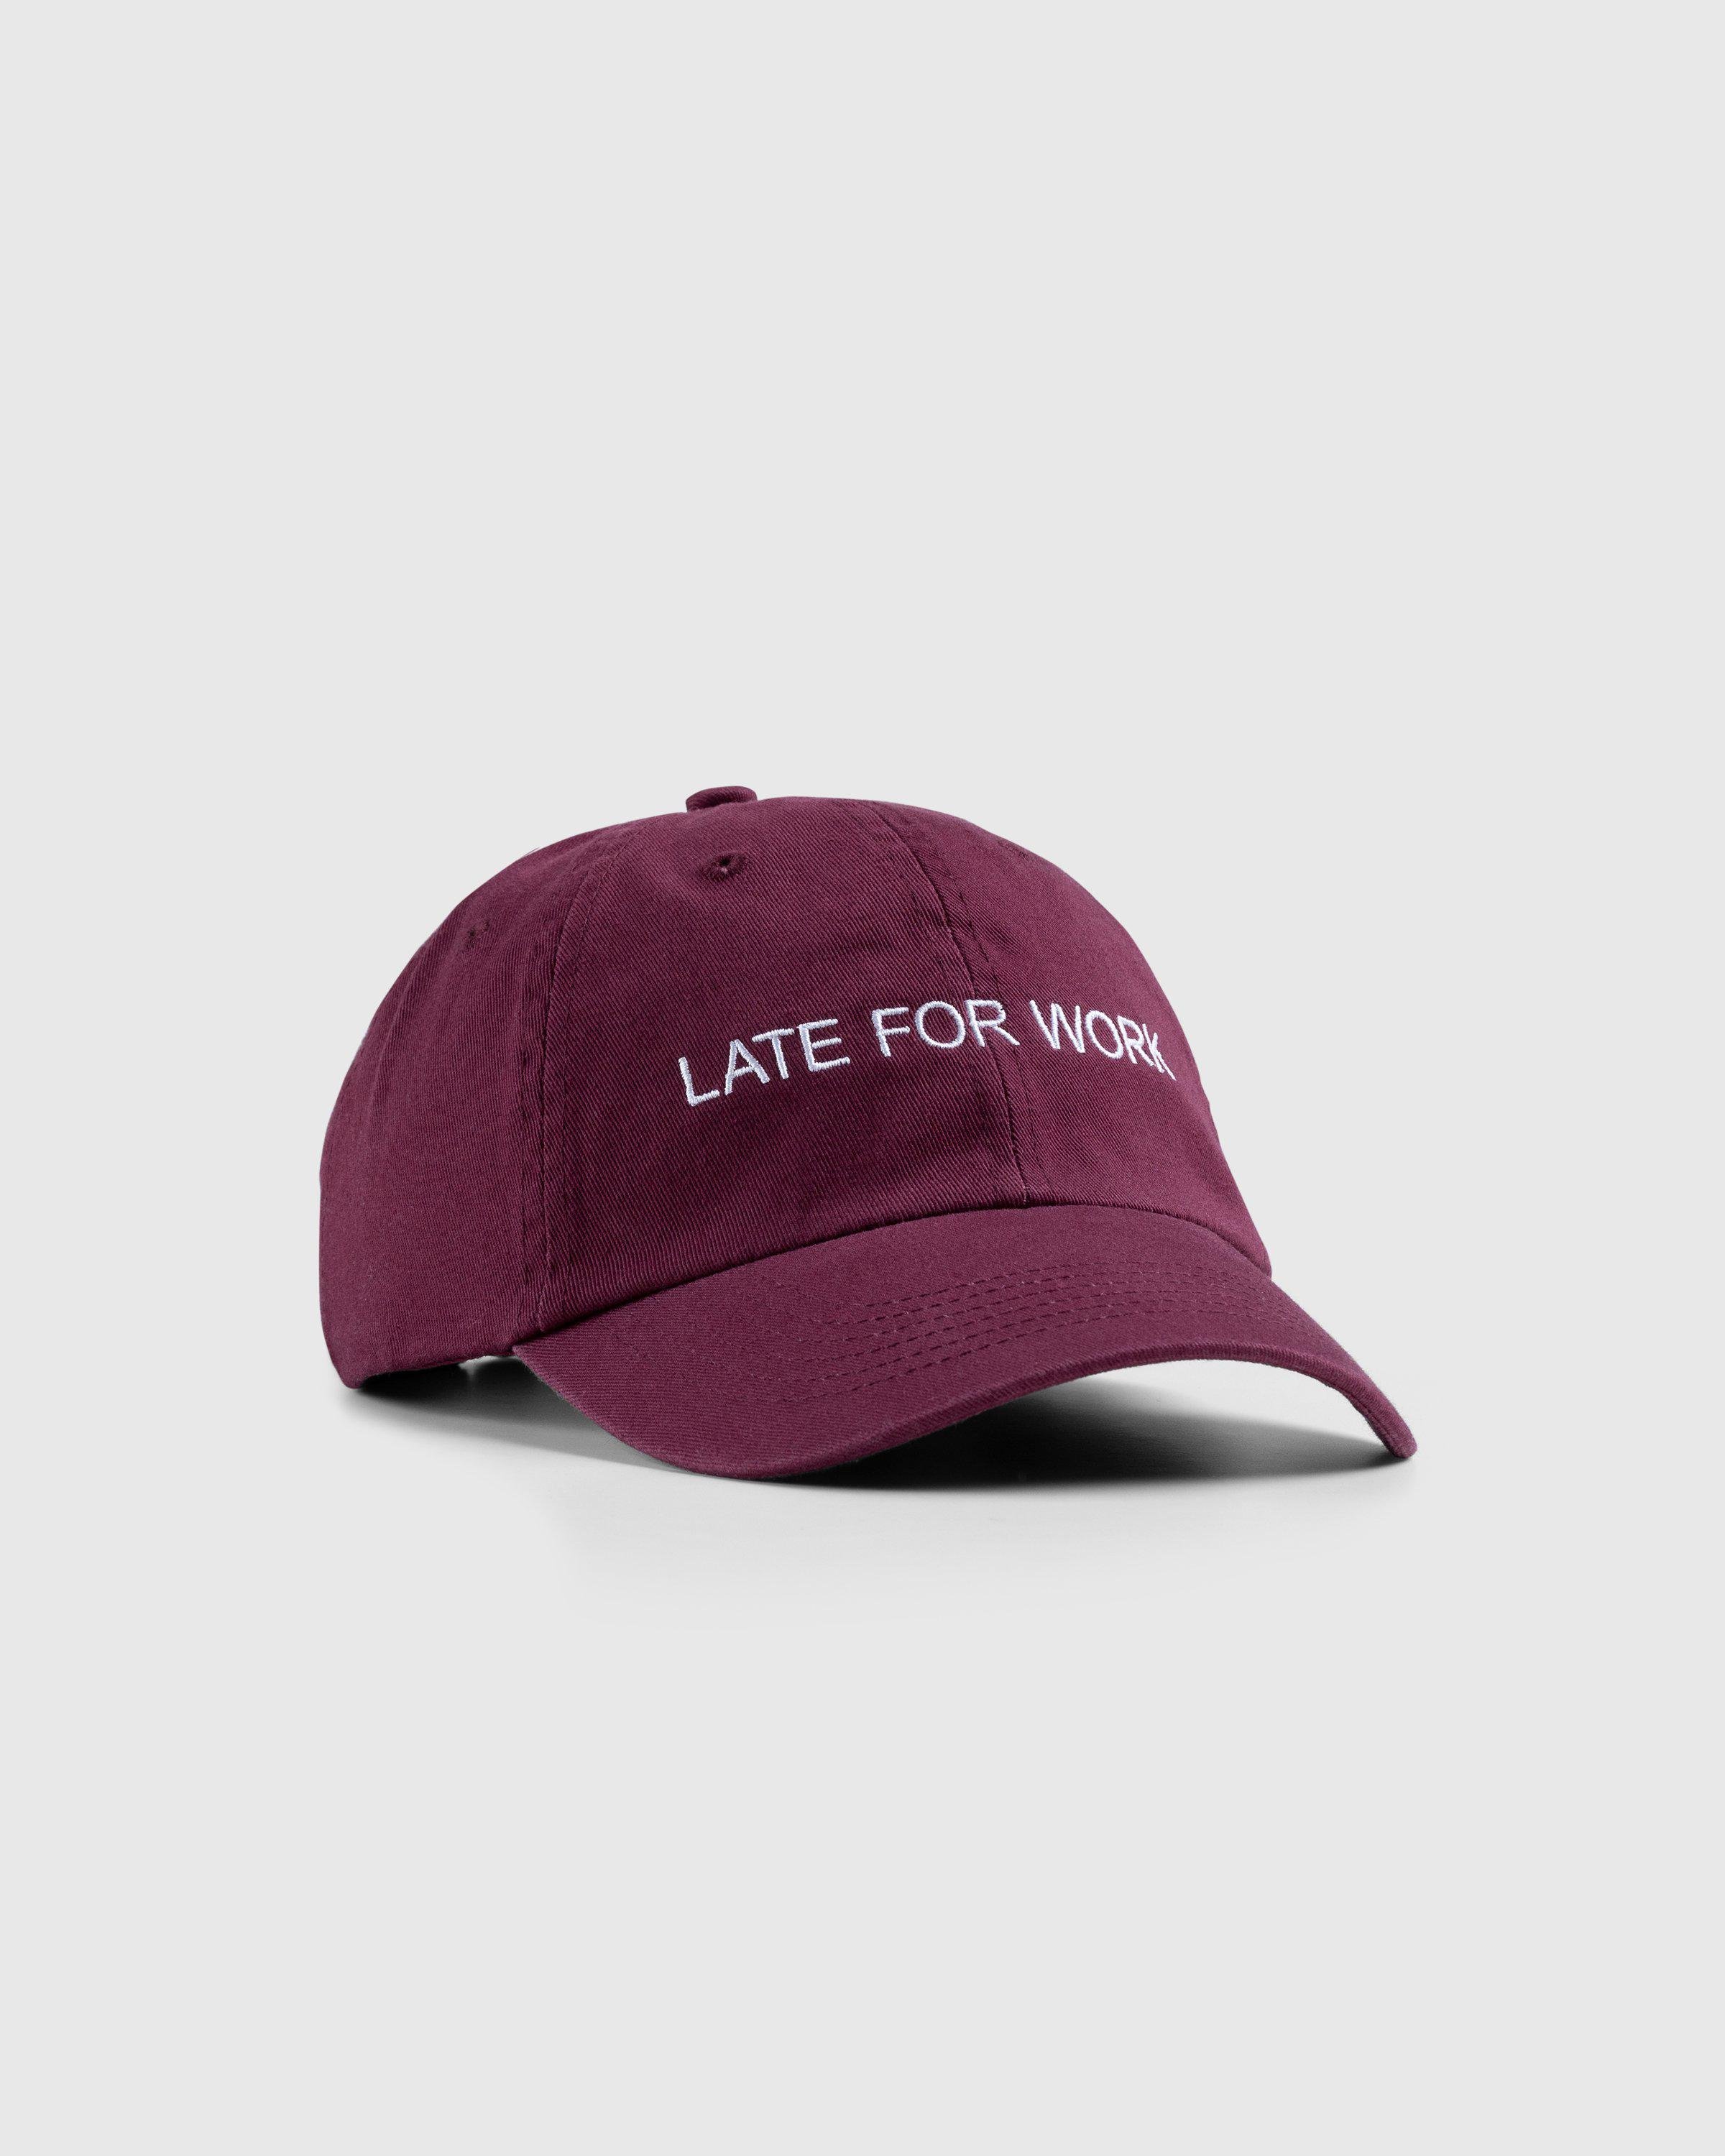 HO HO COCOLate For Work Cap Red by HIGHSNOBIETY